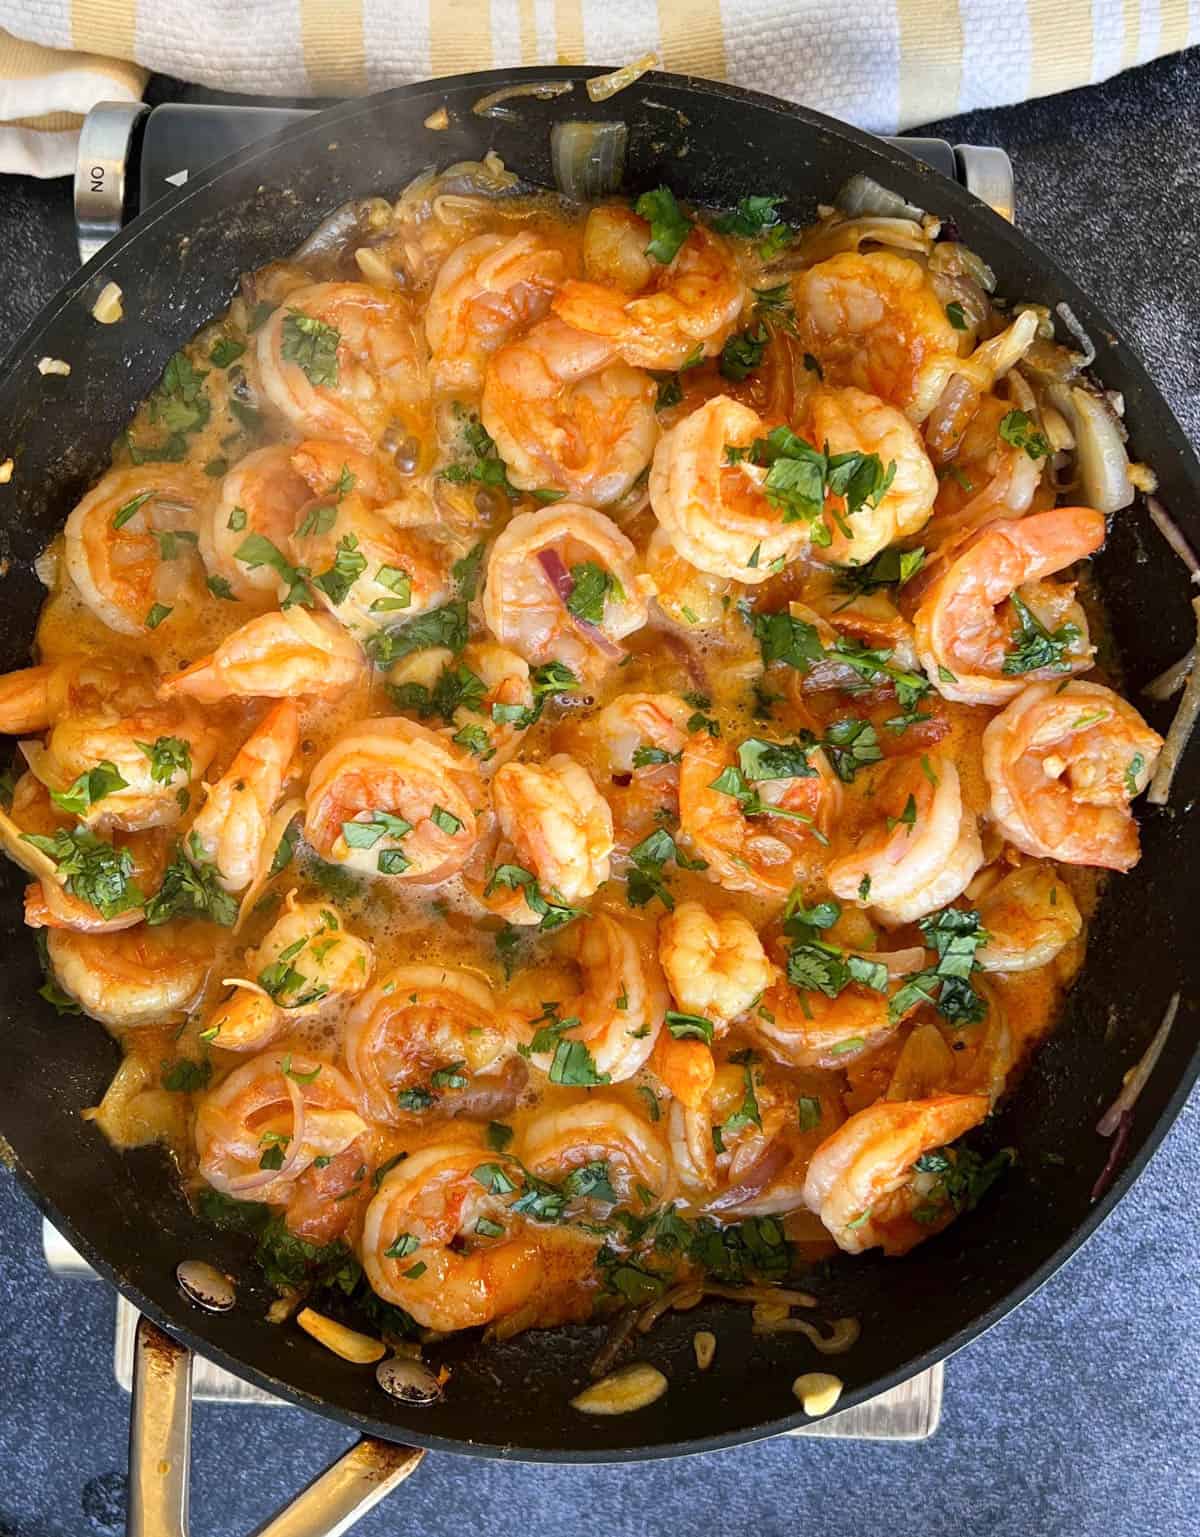 the cooked shrimp in the skillet garnished with cilantro.